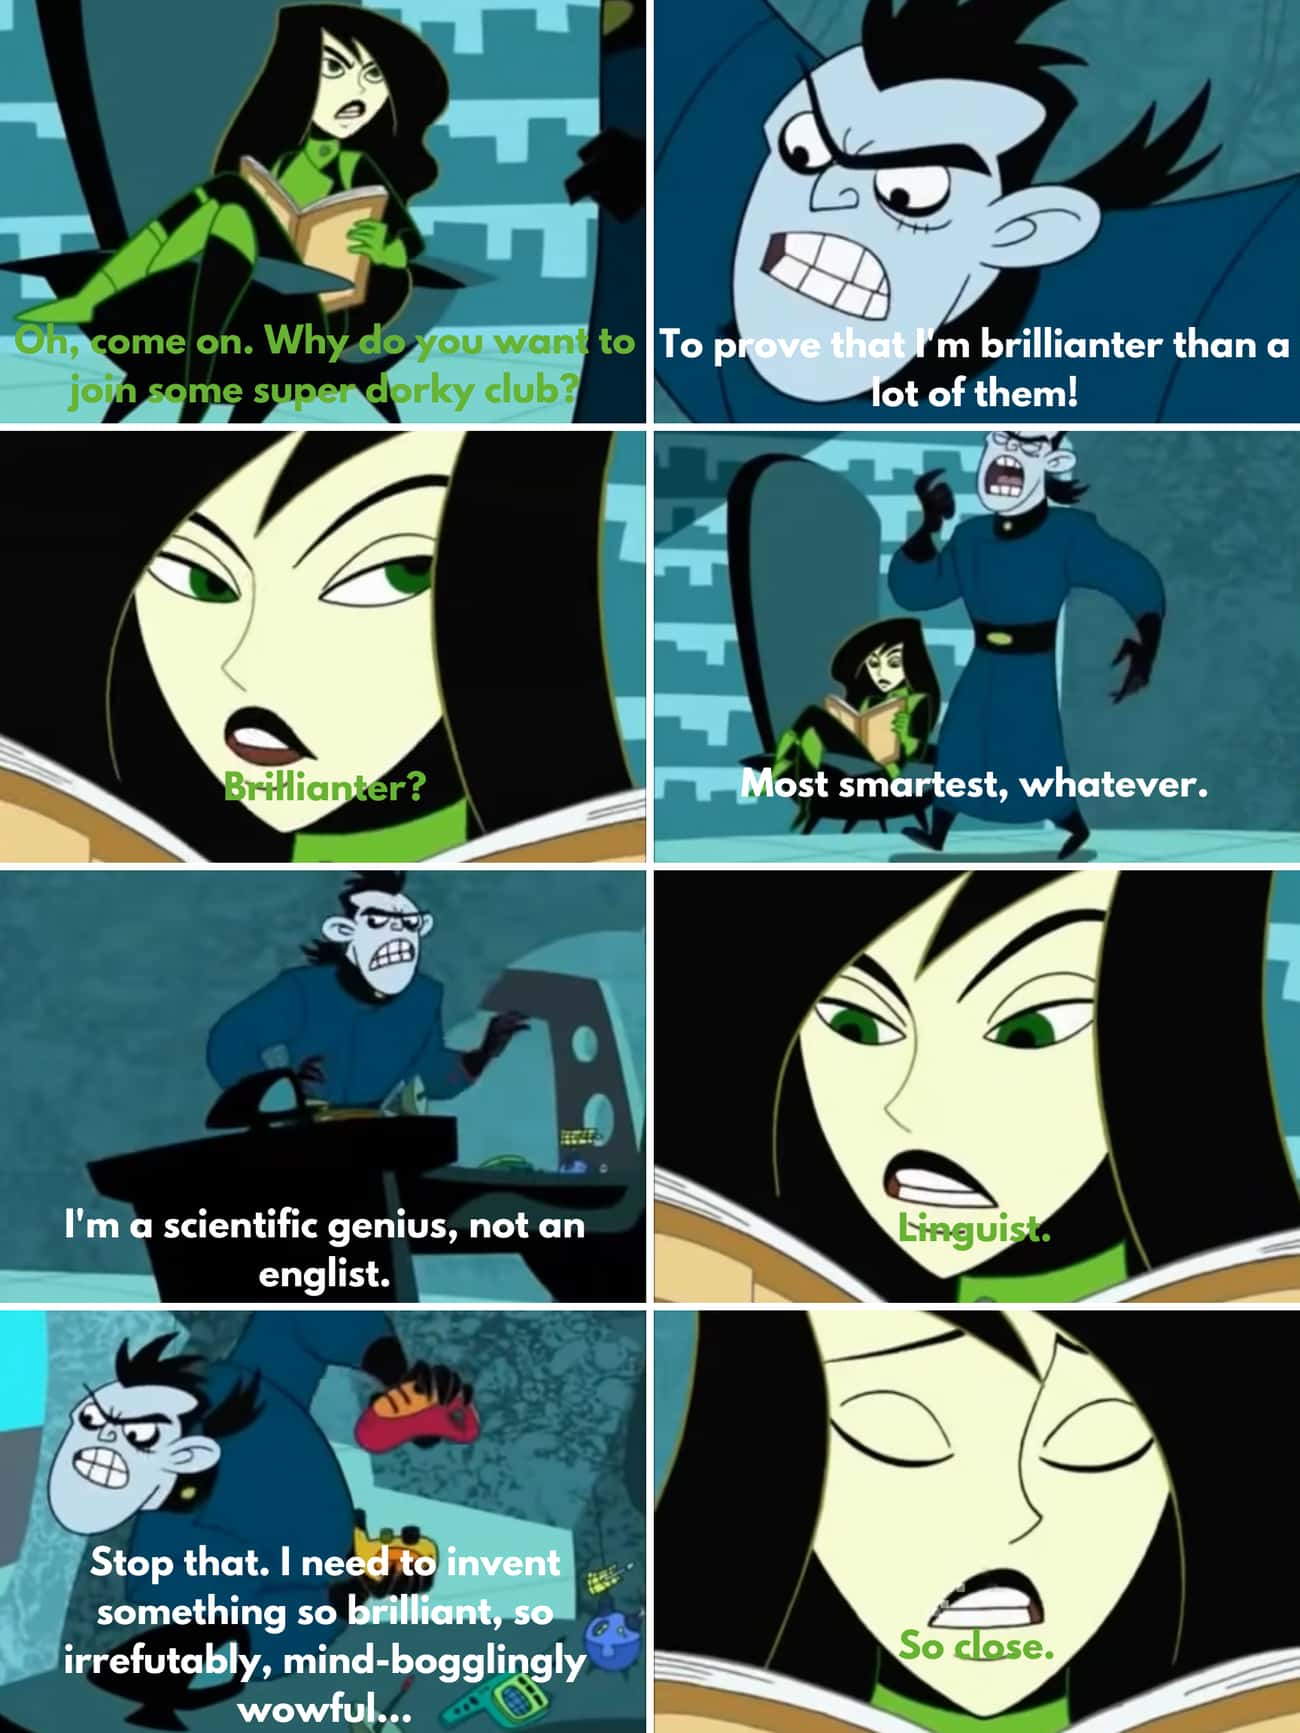 On ‘Kim Possible,’ When Doctor Drakken Mangles His Words After He’s Rejected From The Cerebellum Ultrasmart Super Genius Thinking Society